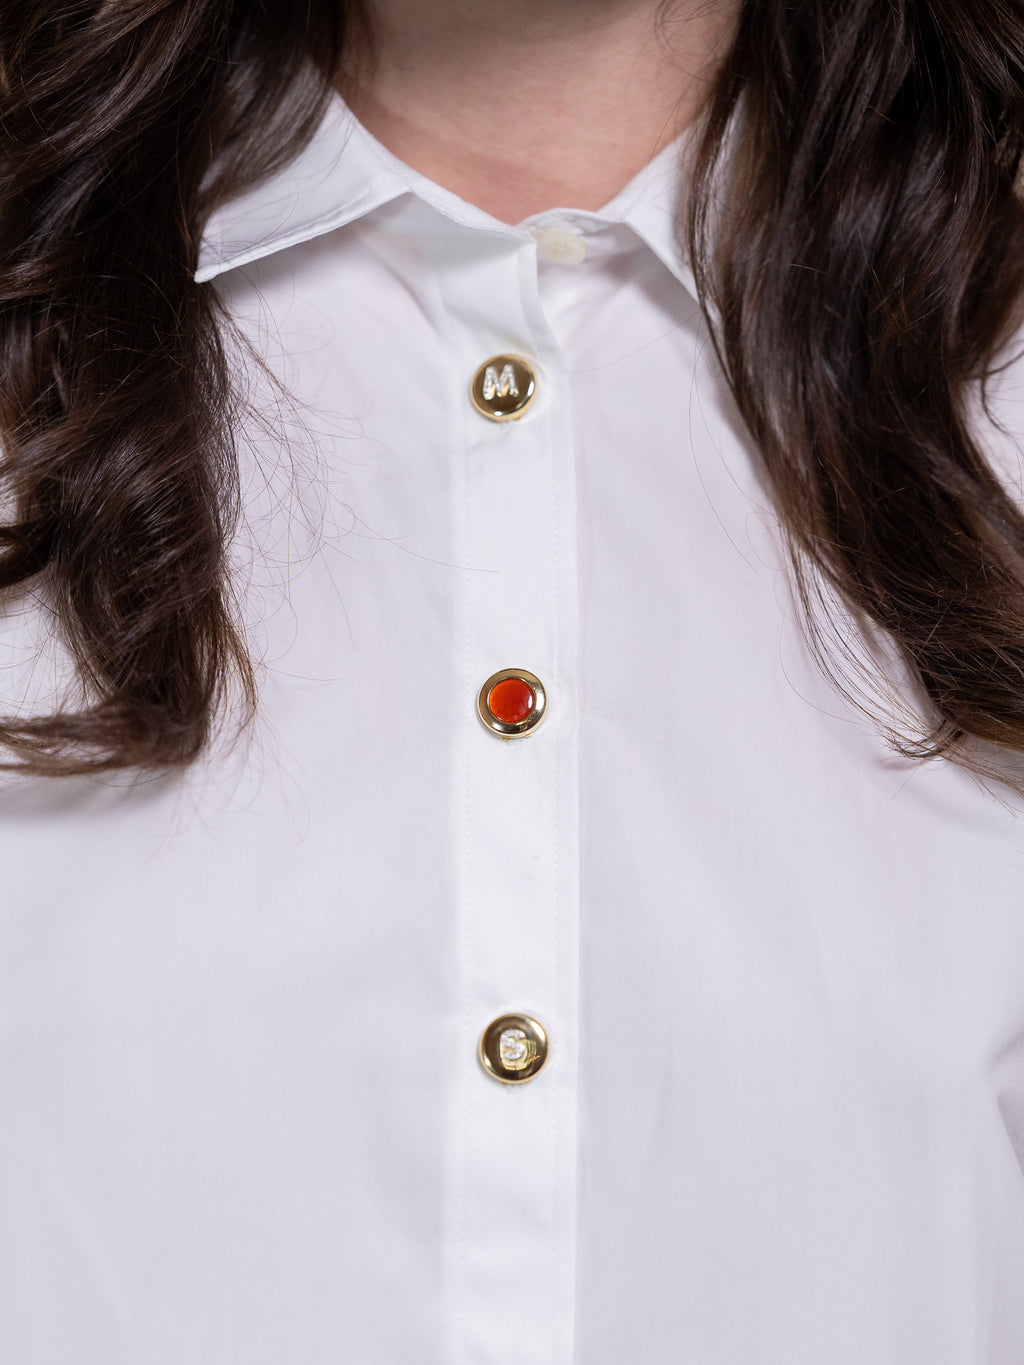 Three button covers on shirt